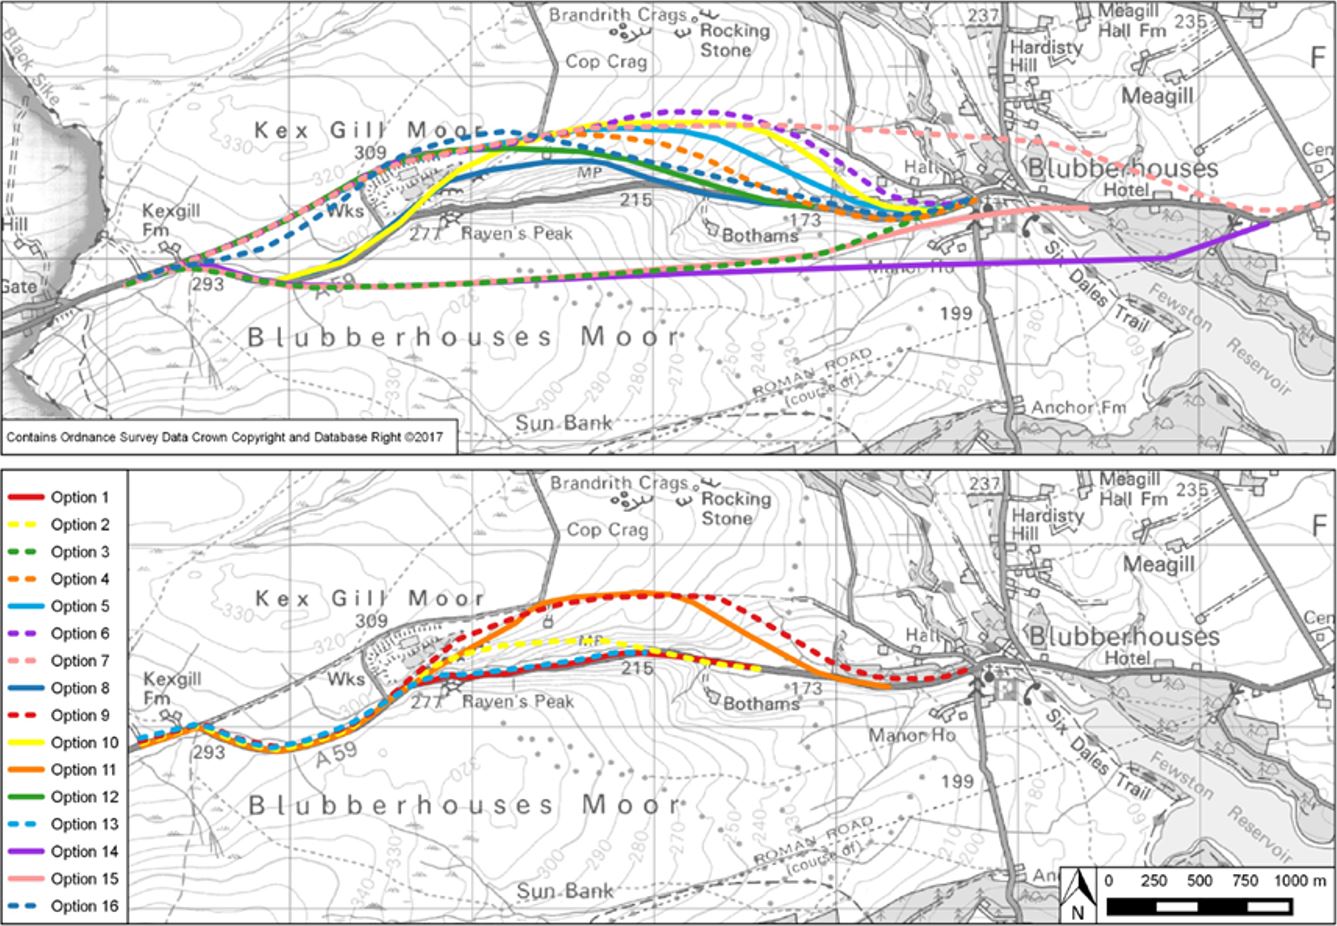 Map showing 16 different route options. Please contact us for this information in a different format.